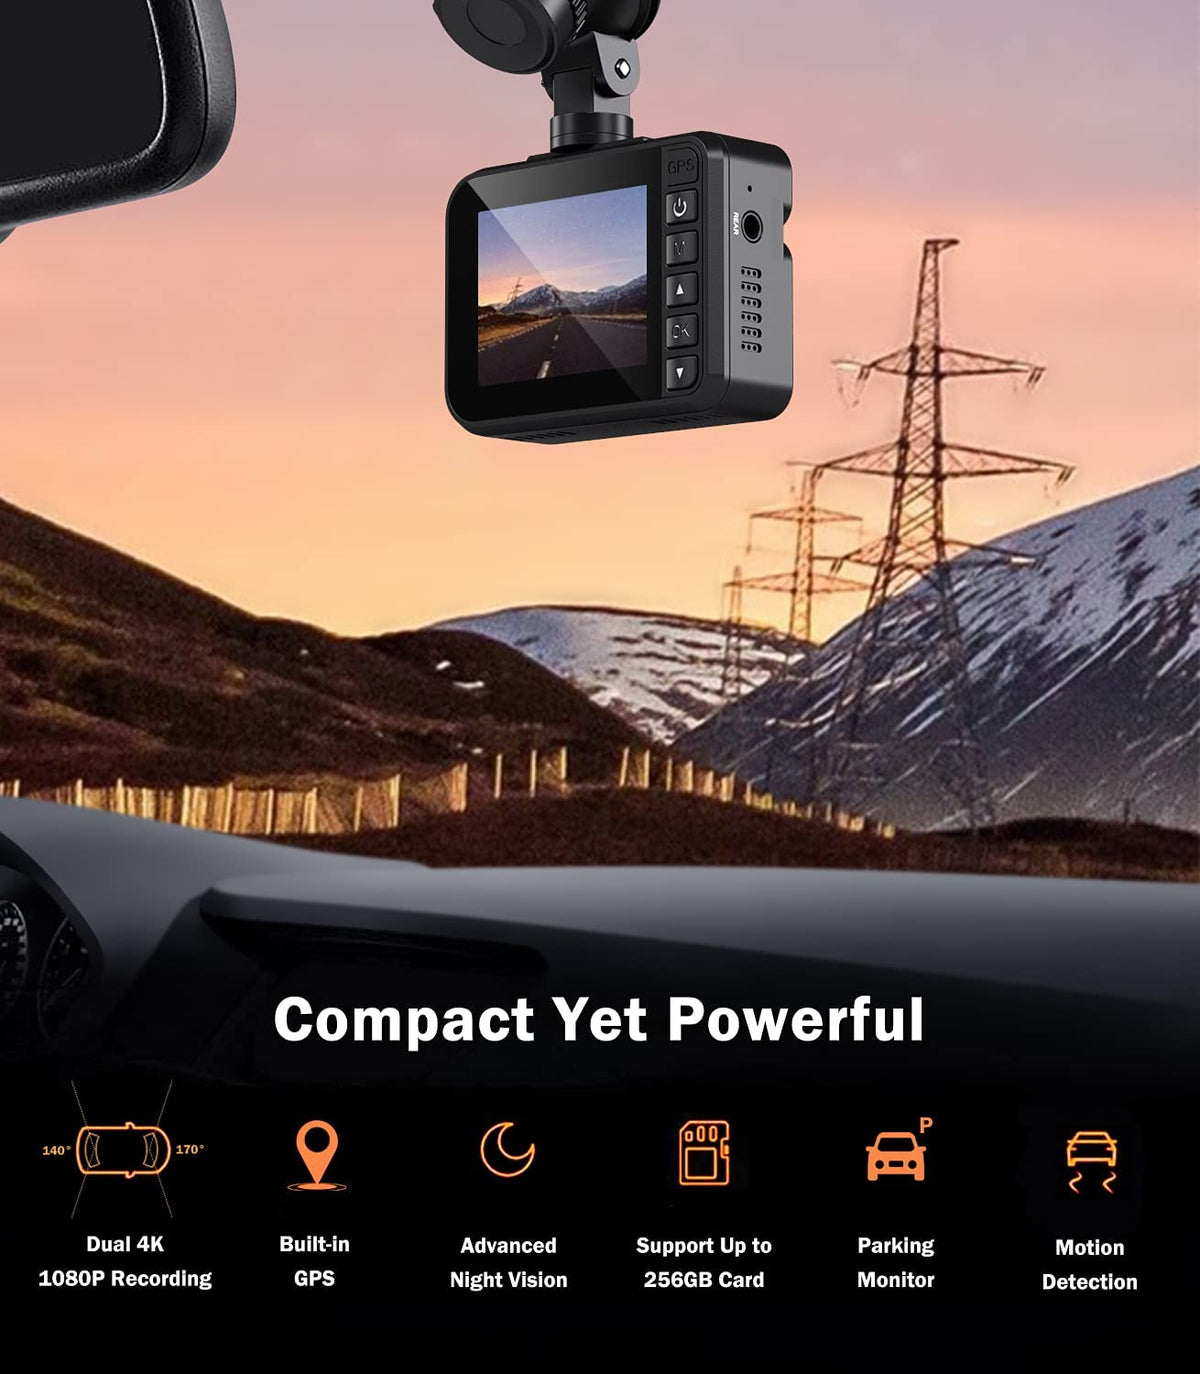 ORSKEY Dash Cam Front and Rear 1080P Full HD Dual Dash Camera In Car Camera  Dashboard Camera Dashcam for Cars 170 Wide Angle HDR with 3.0 LCD Display